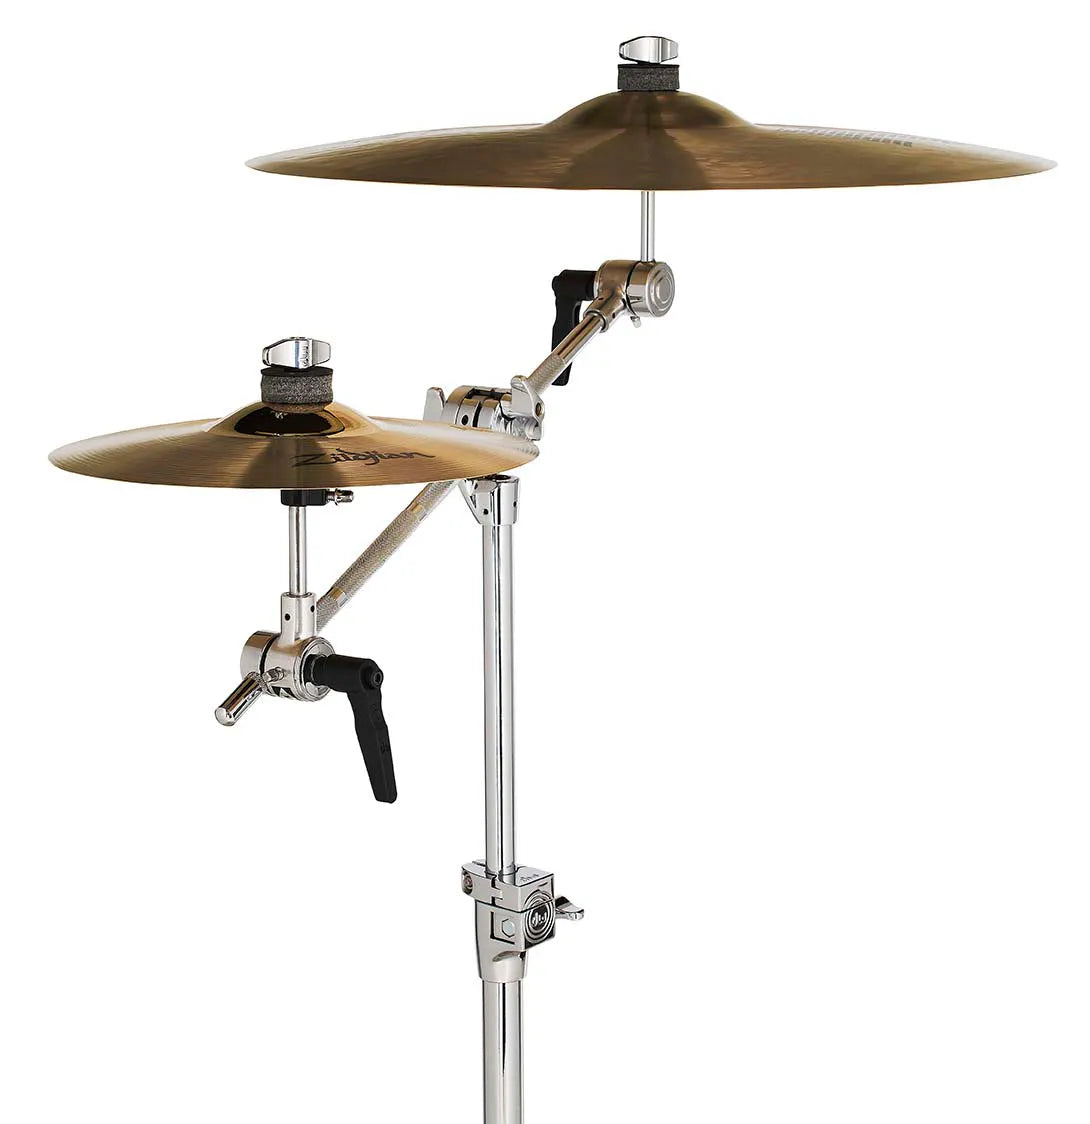 DWSM2034 - Cymbal Tilter w/ 1/2" Clamp